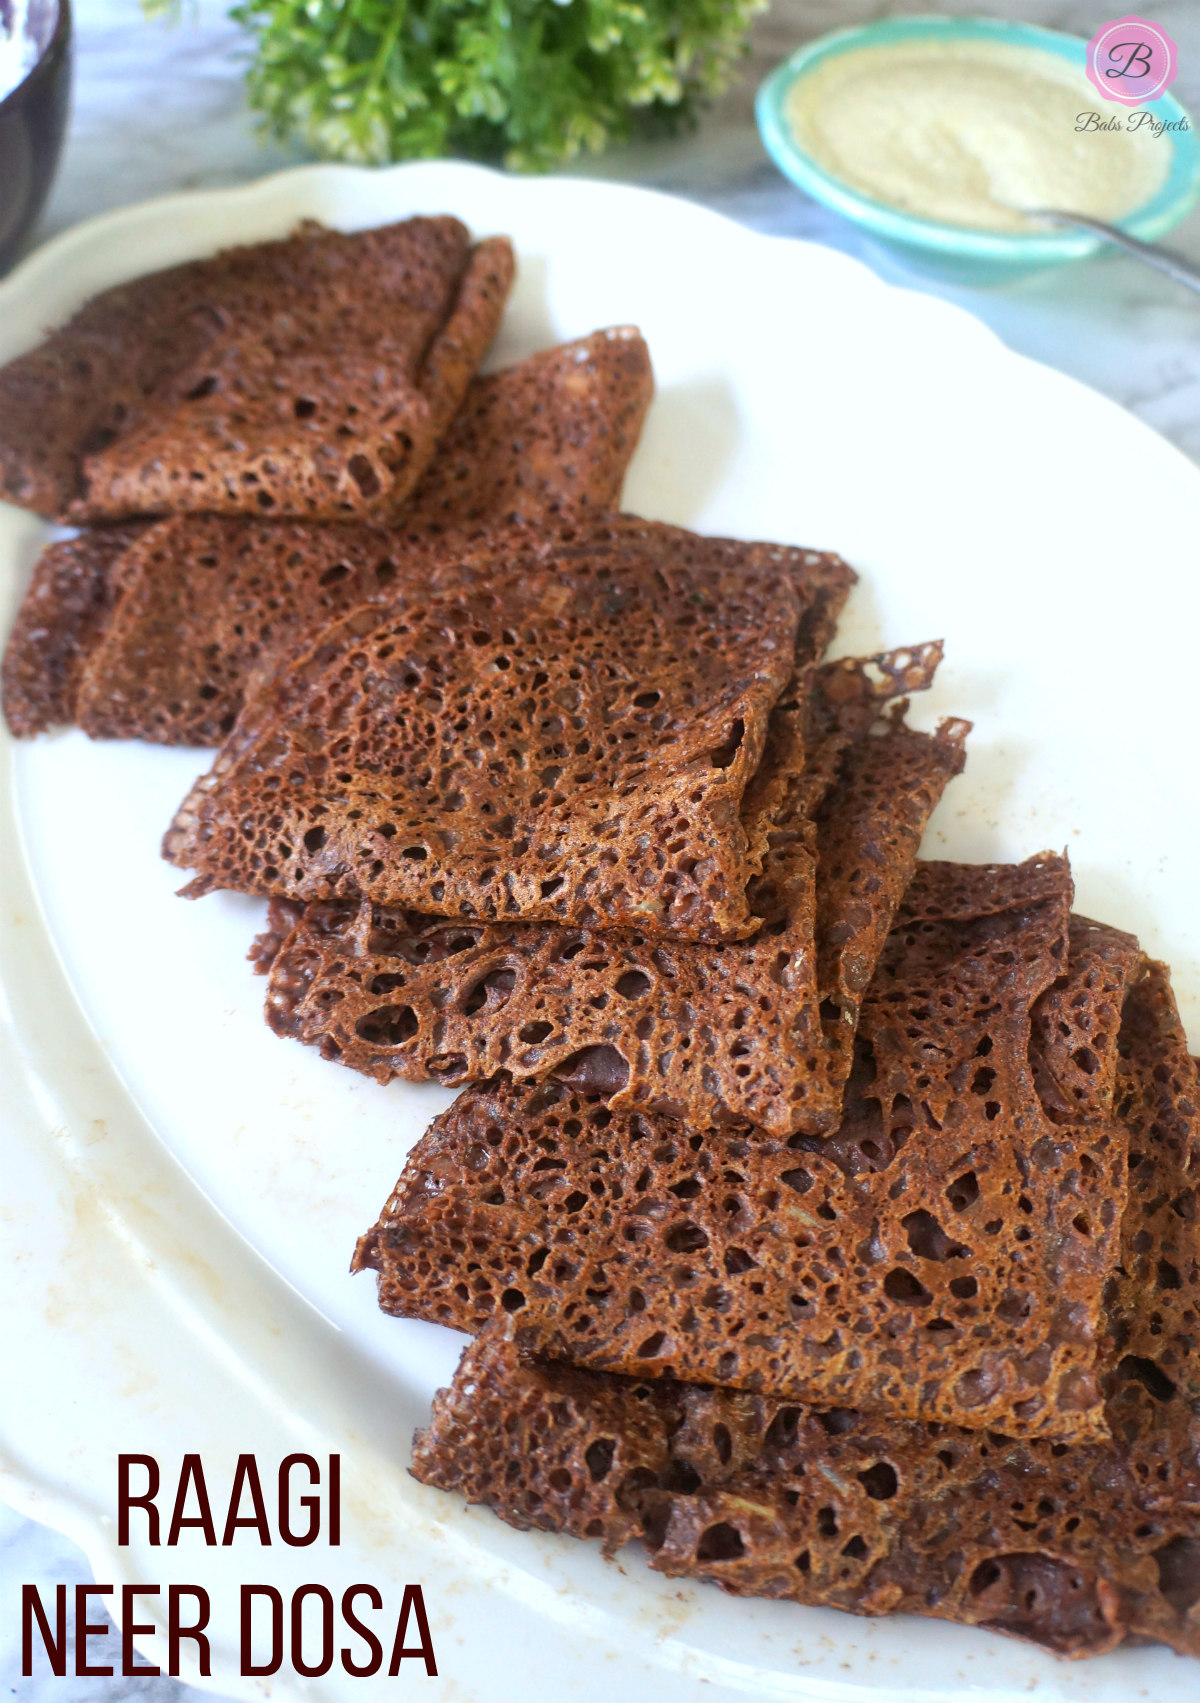 Black Bean Dosa/Crepe - Easy and Instant